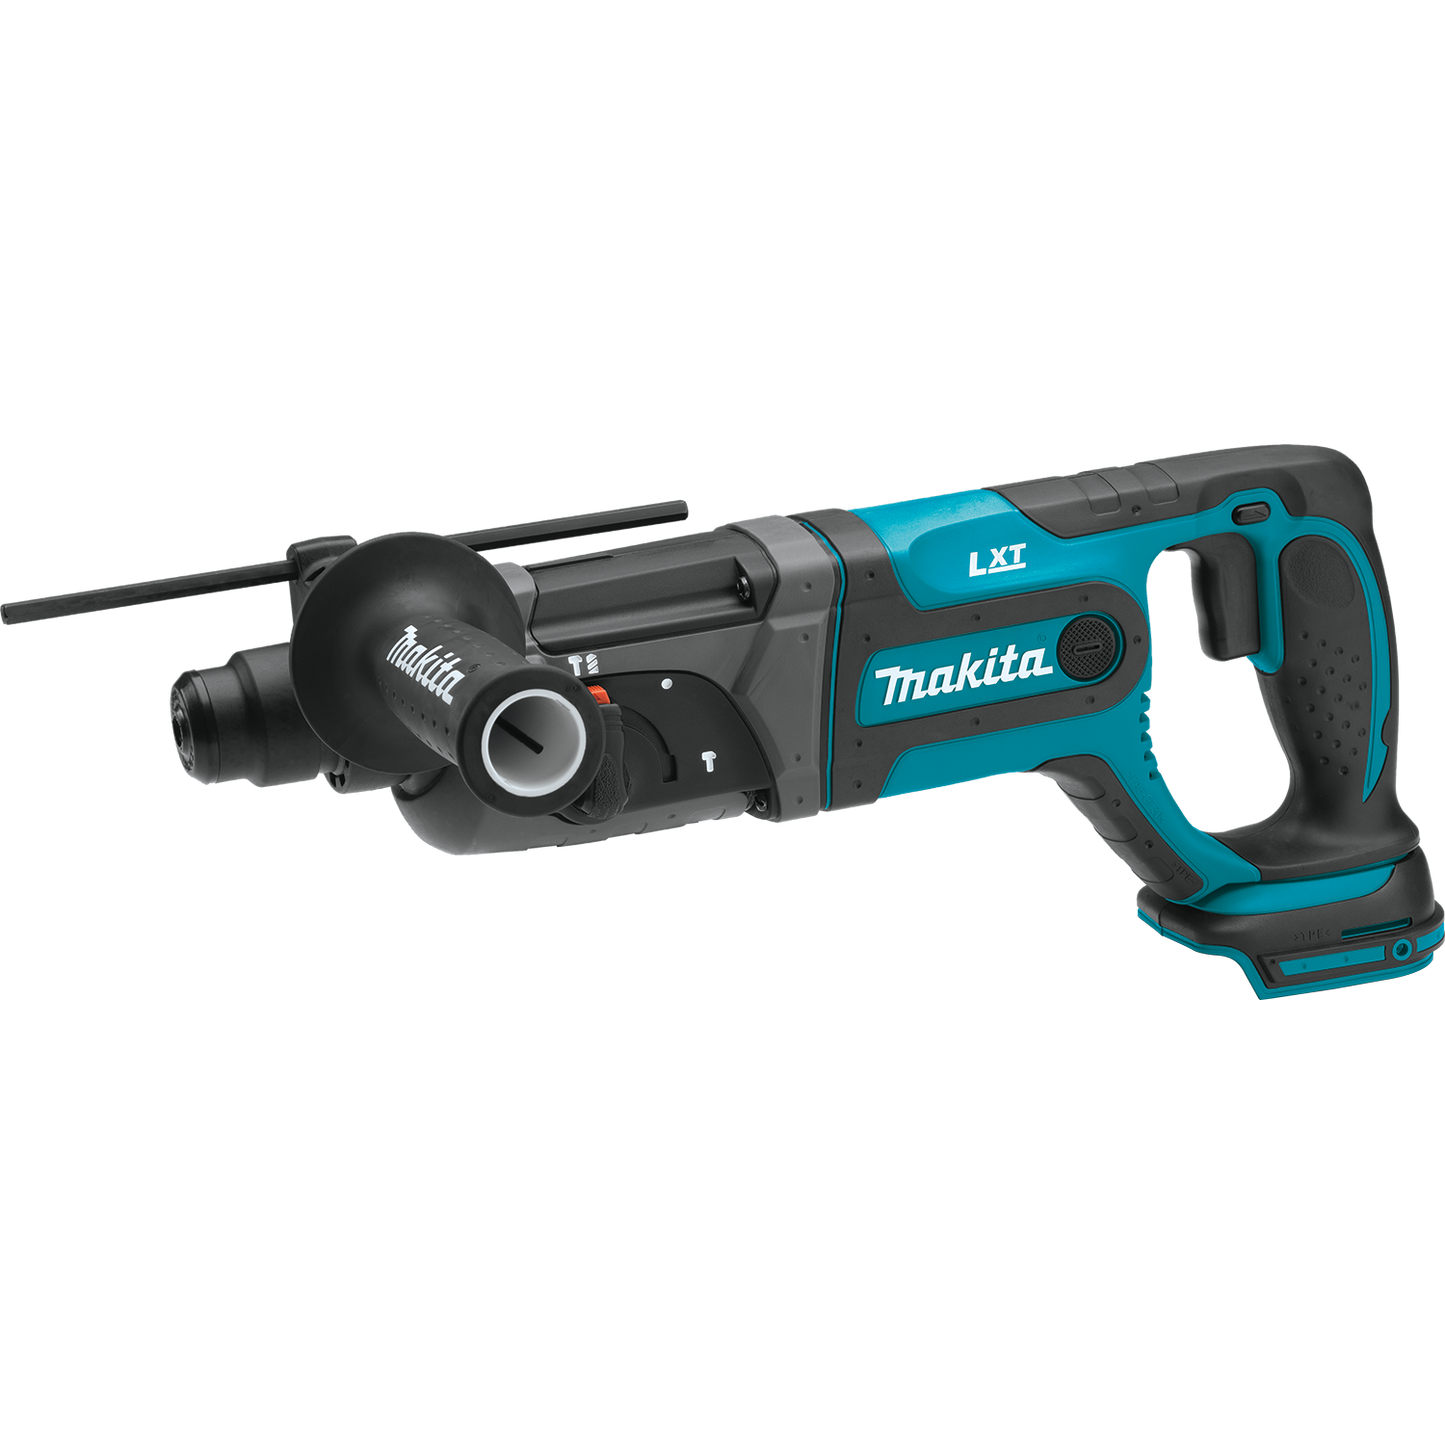 Makita 18 Volt LXT Lithium Ion Cordless 7/8 Inch SDS Rotary Hammer Factory Serviced (Tool Only)